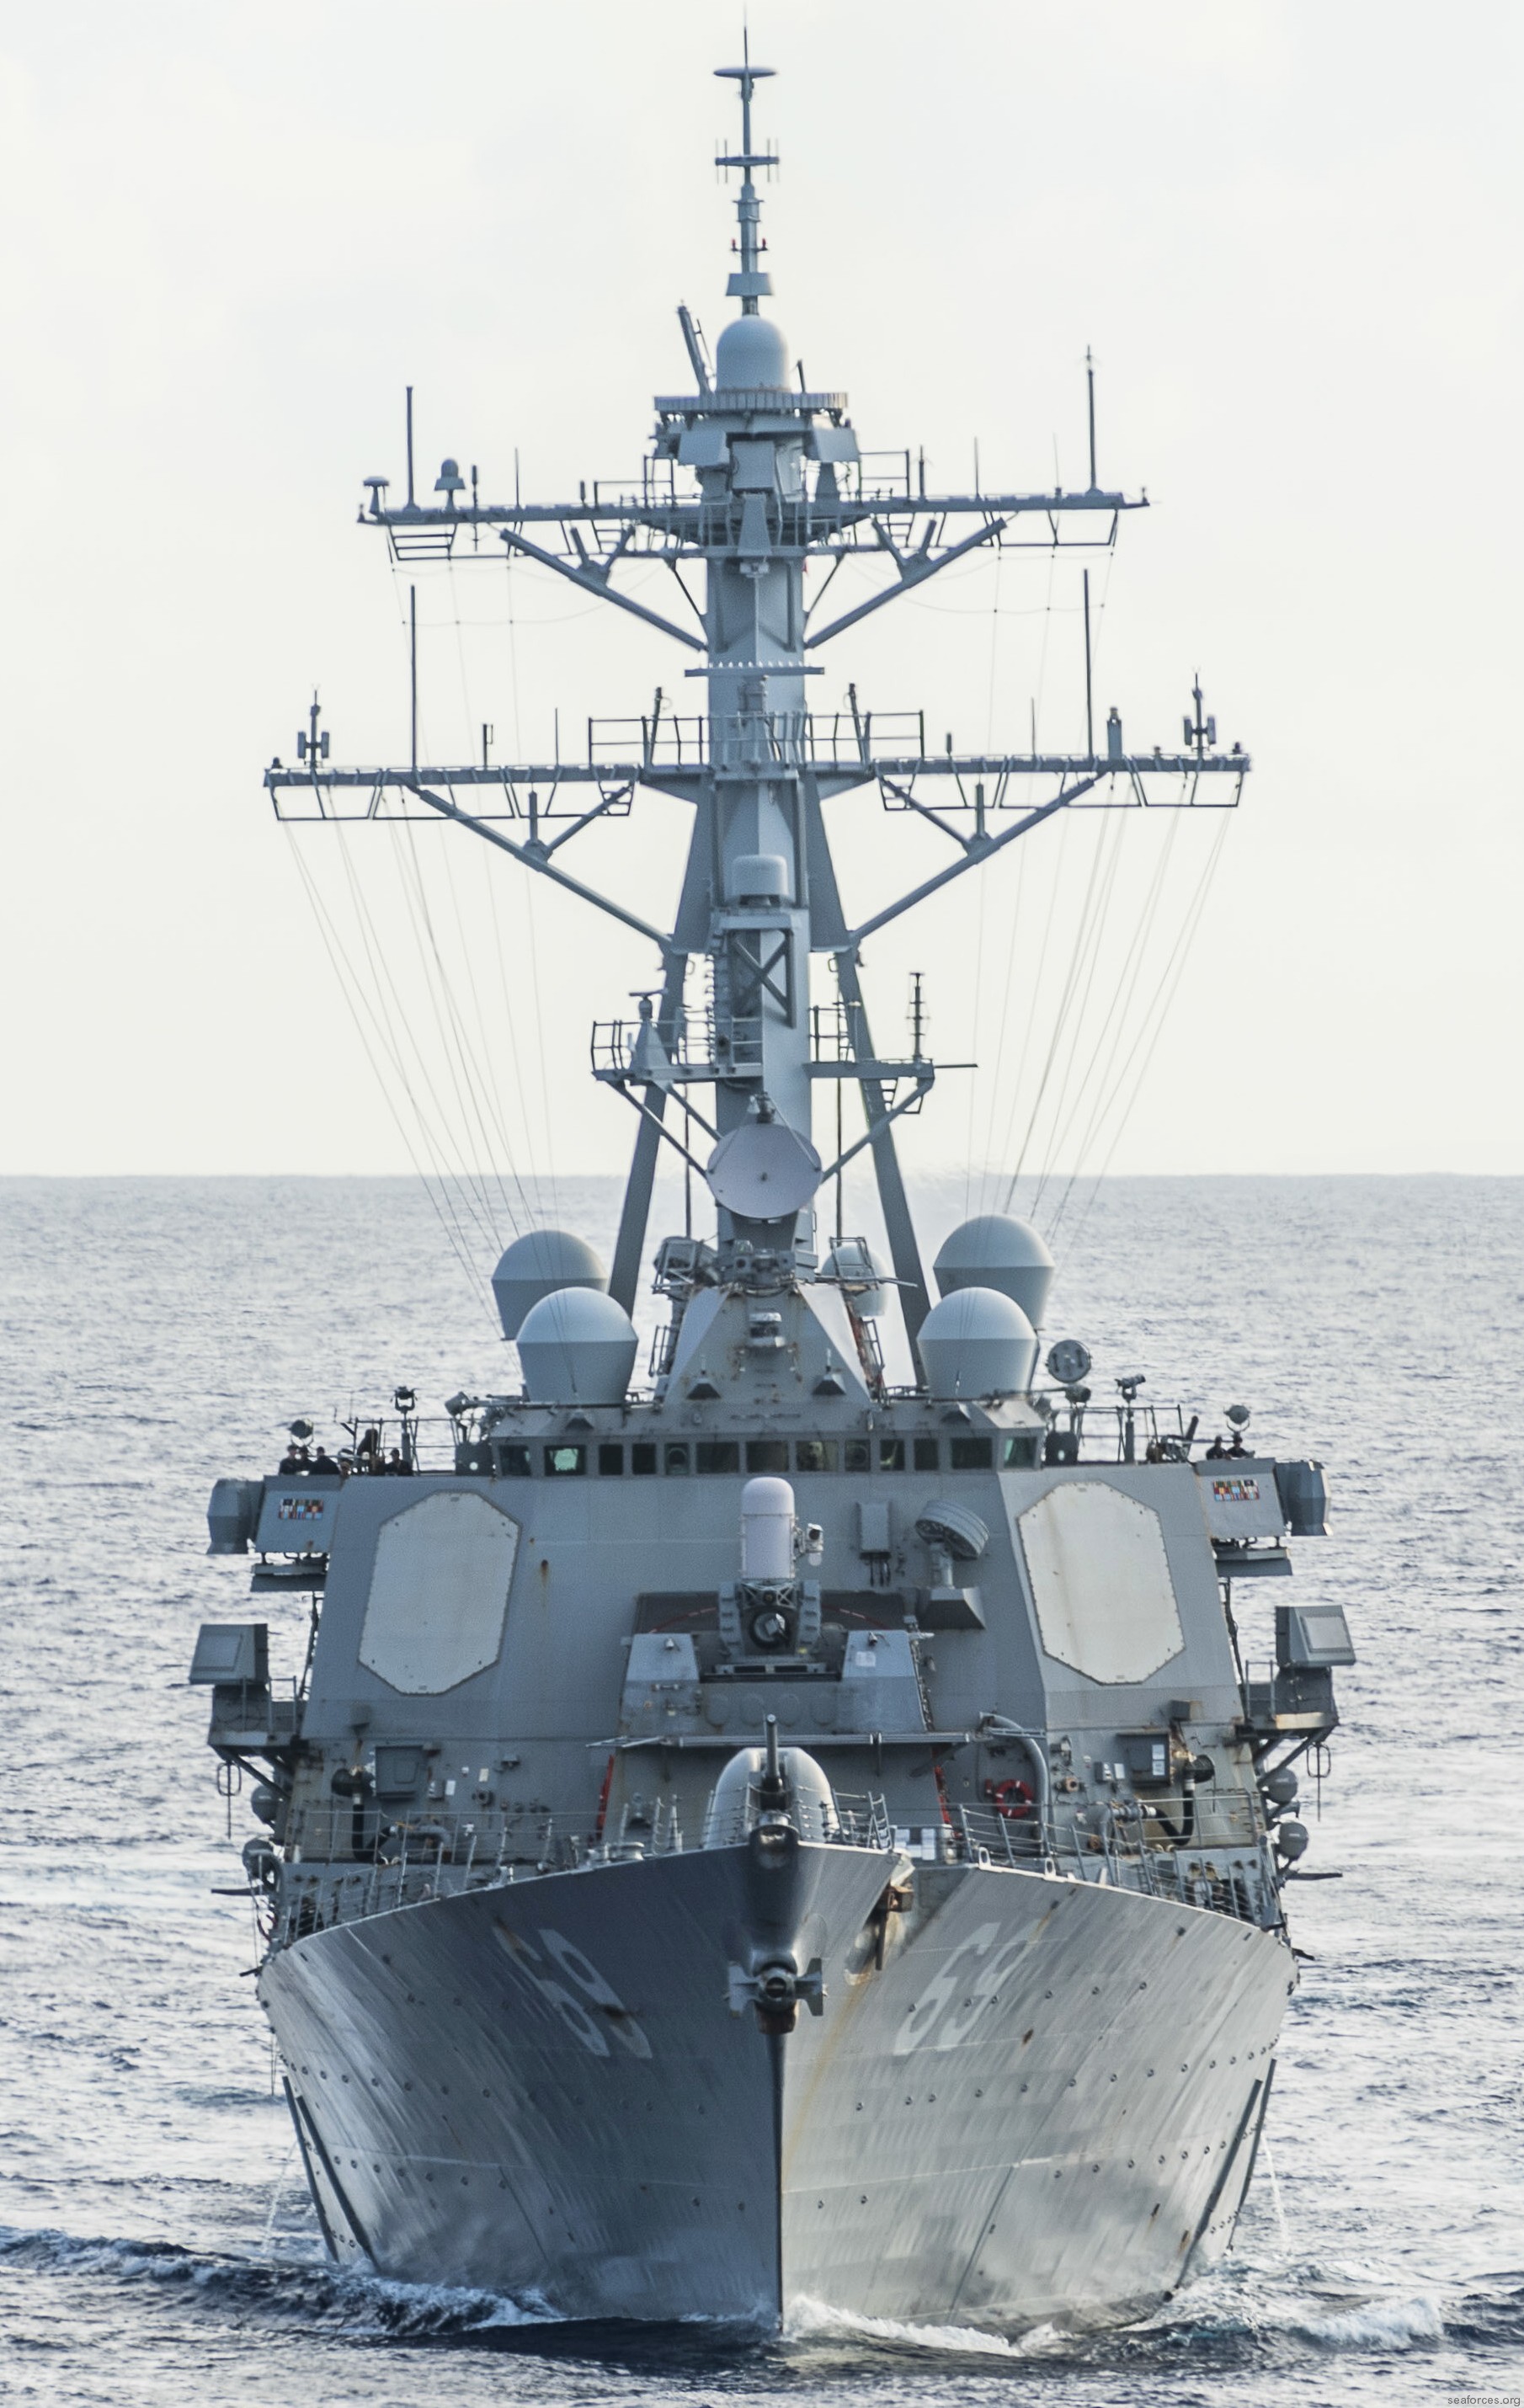 ddg-69 uss milius guided missile destroyer arleigh burke class aegis bmd 07